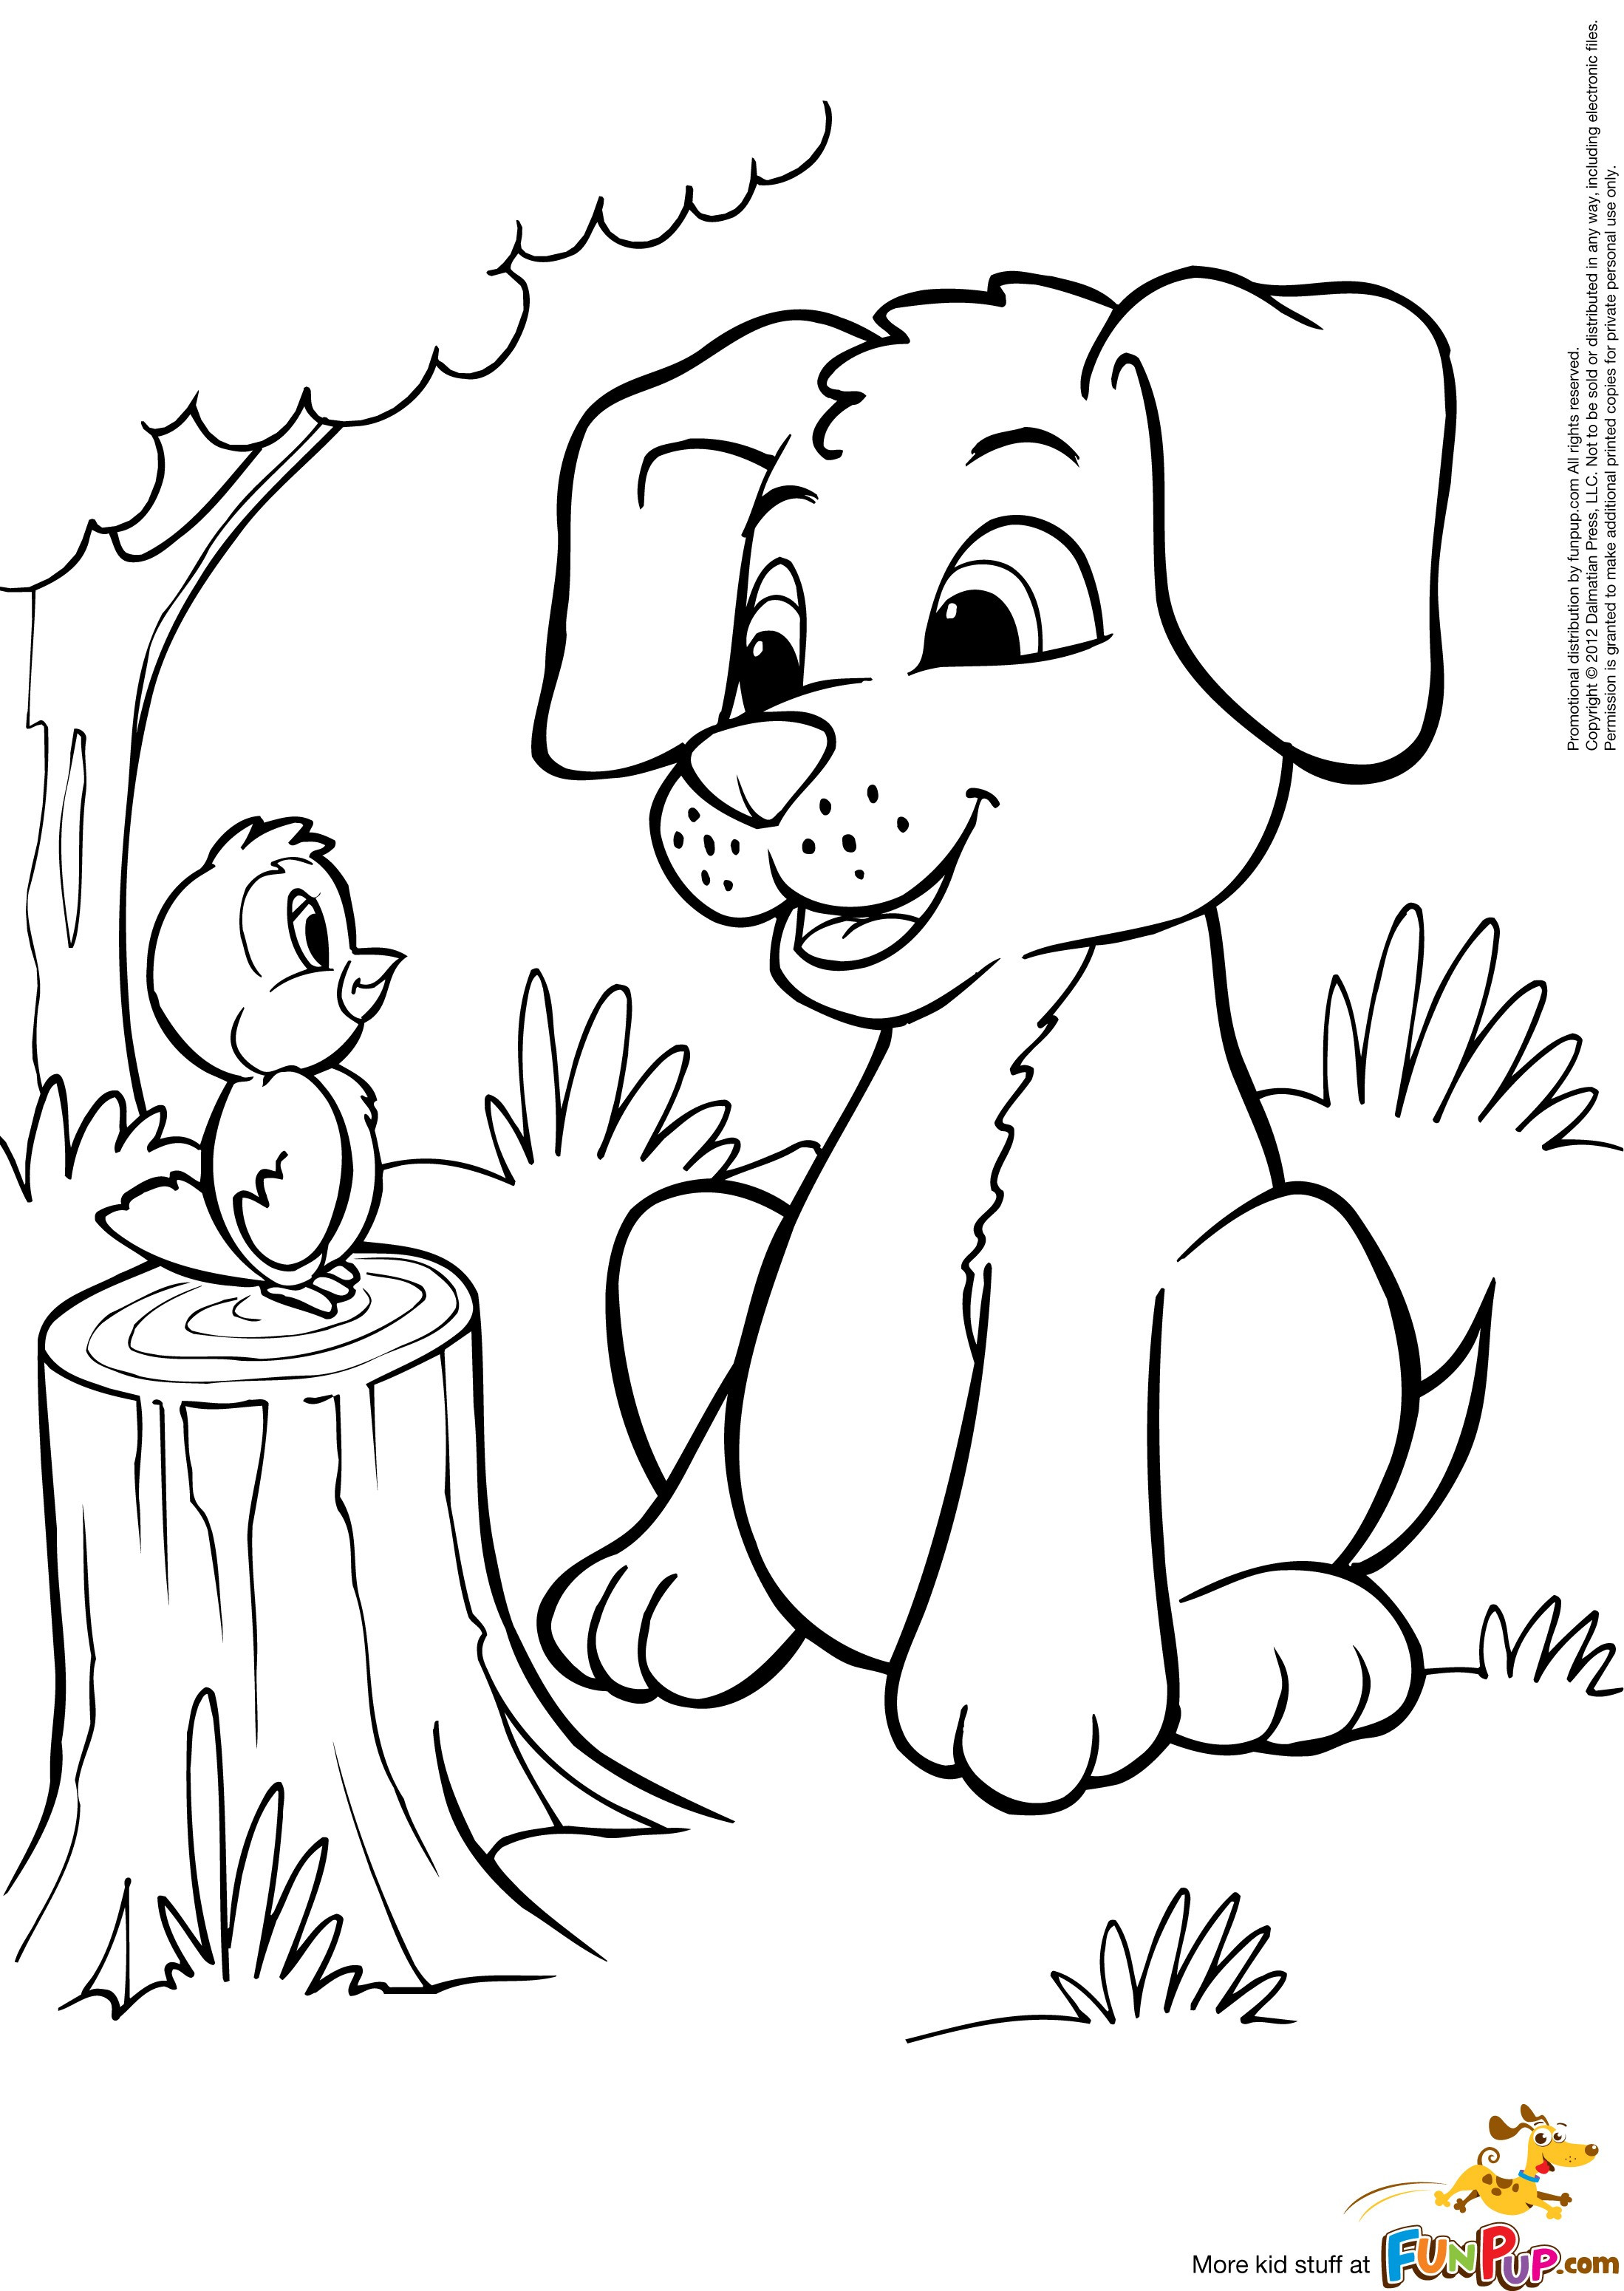 Free Coloring Pages Of Cute Puppies
 Free Coloring Pages Cute Kittens And Puppies 5206